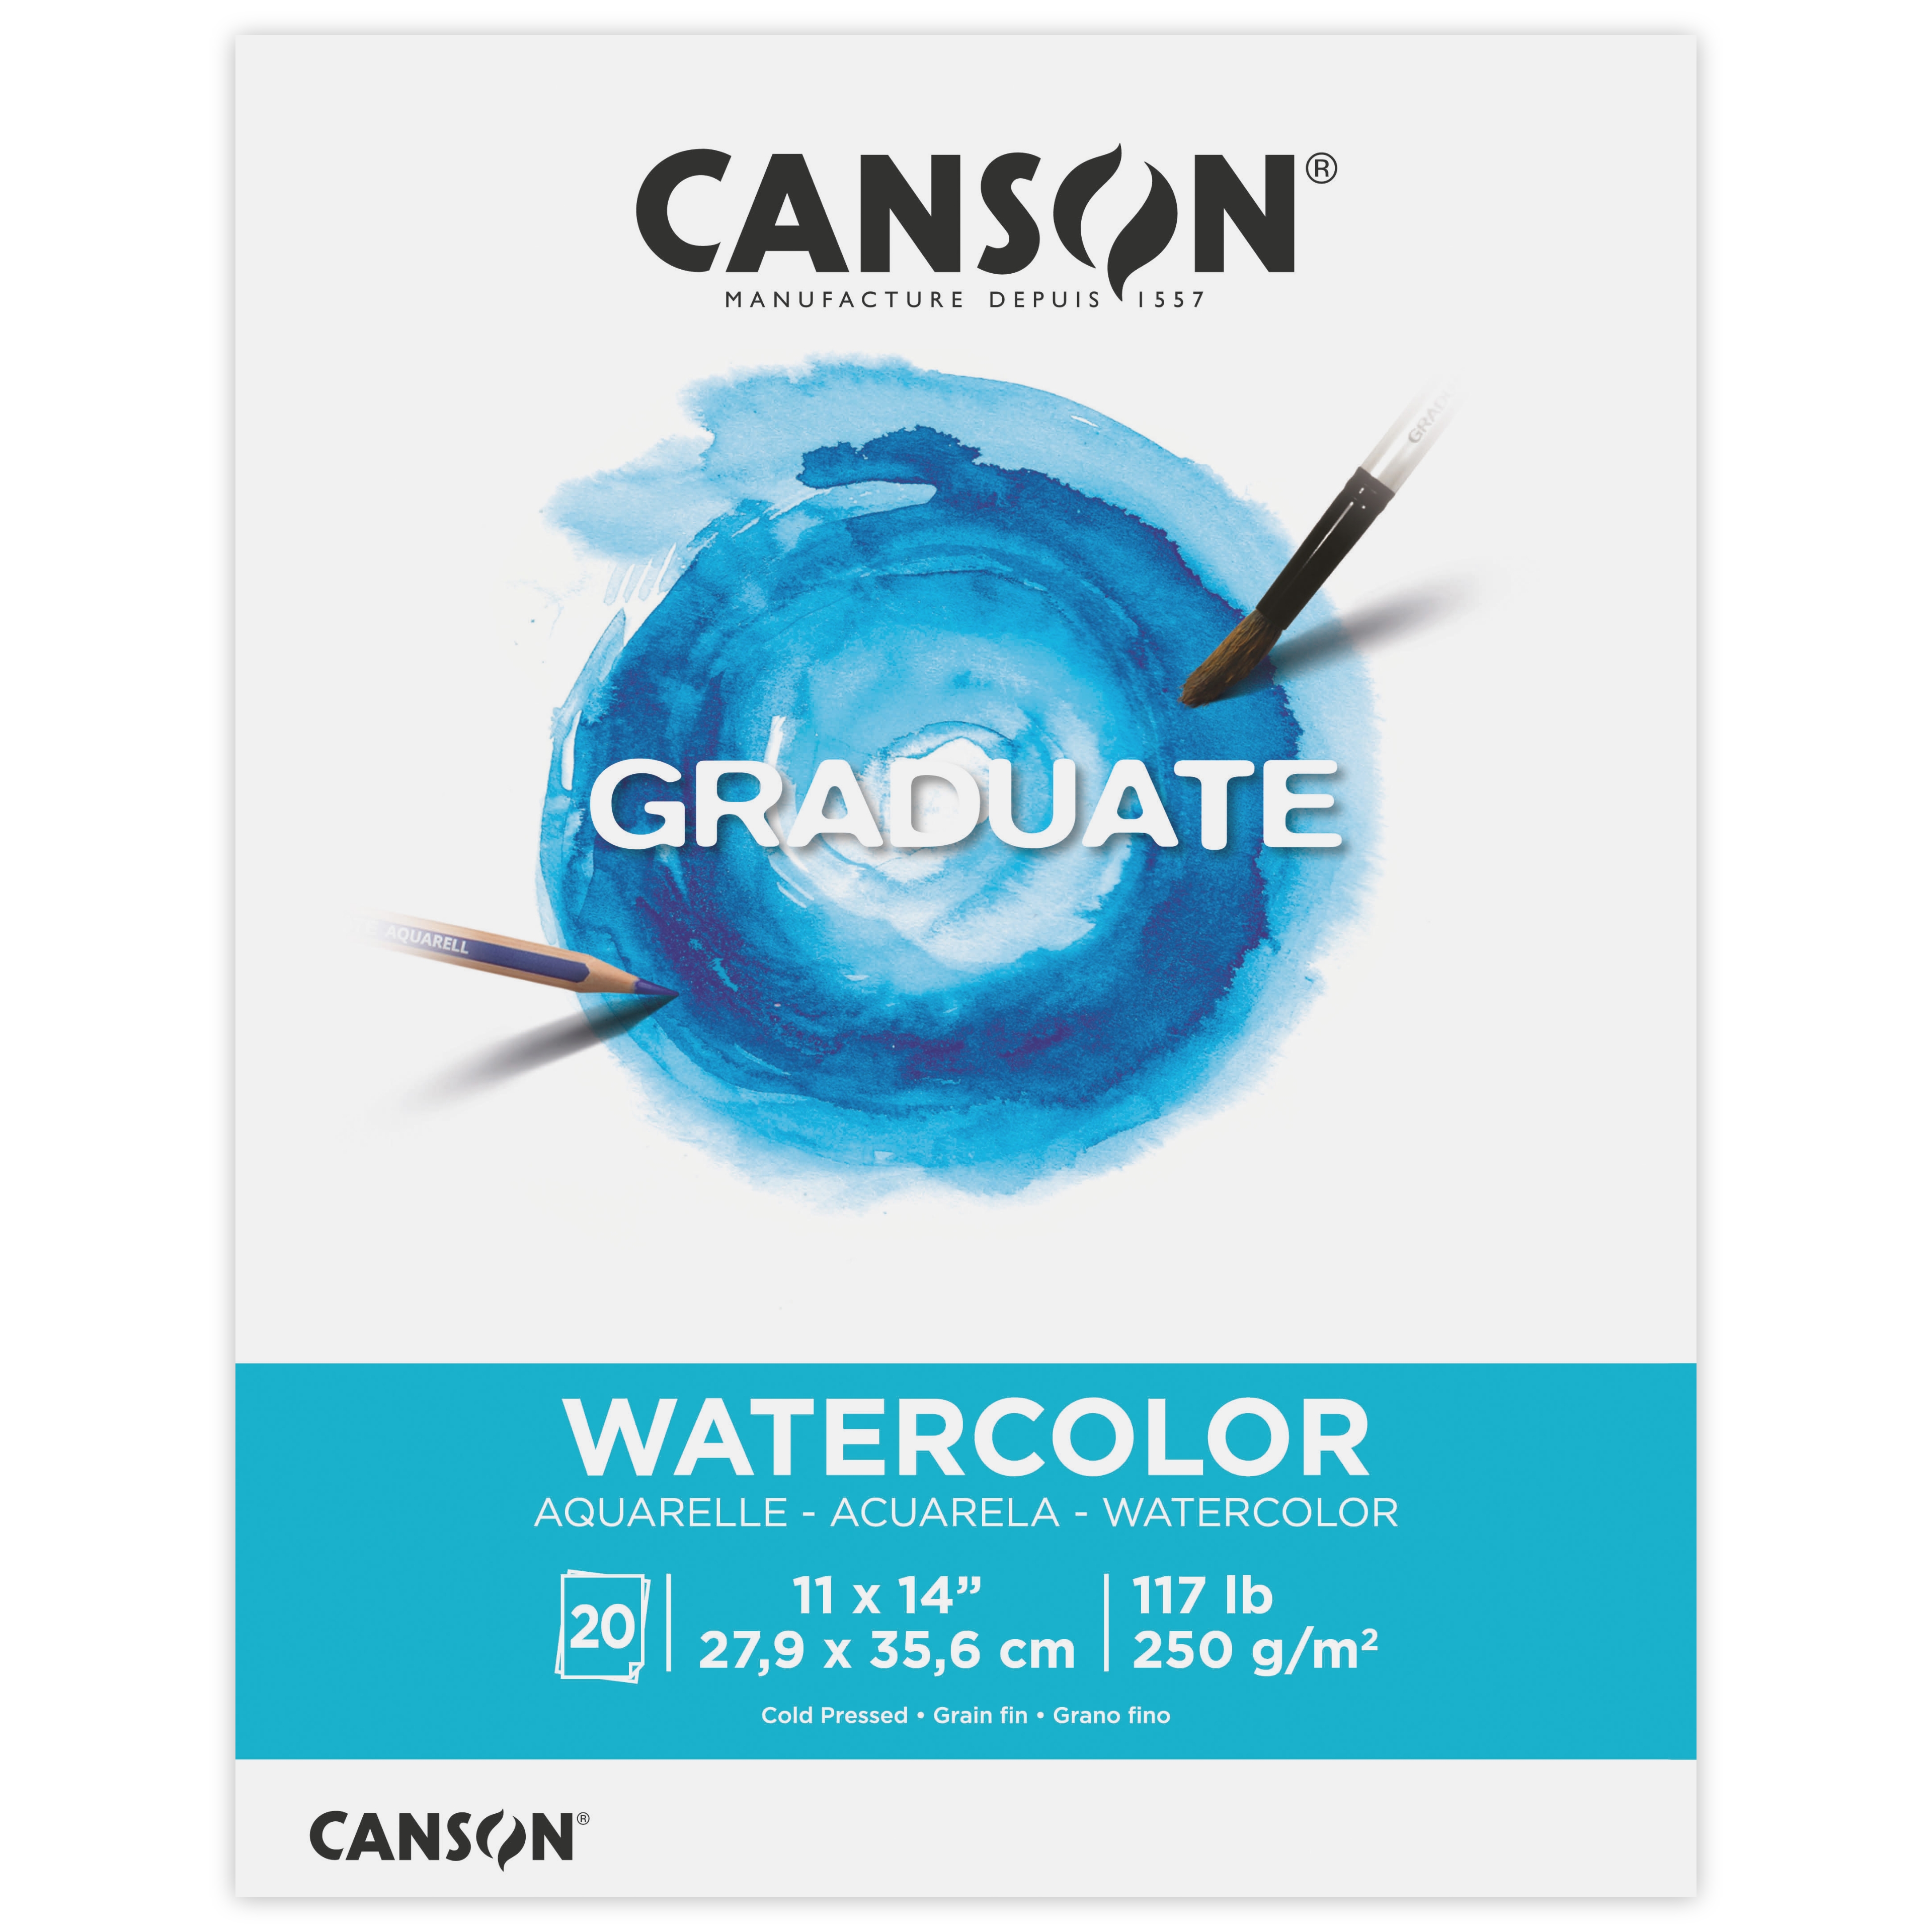 Canson Graduate 11 x 14 Watercolor Paper Pad (20 Sheets), Art Paper for  Adults and Students